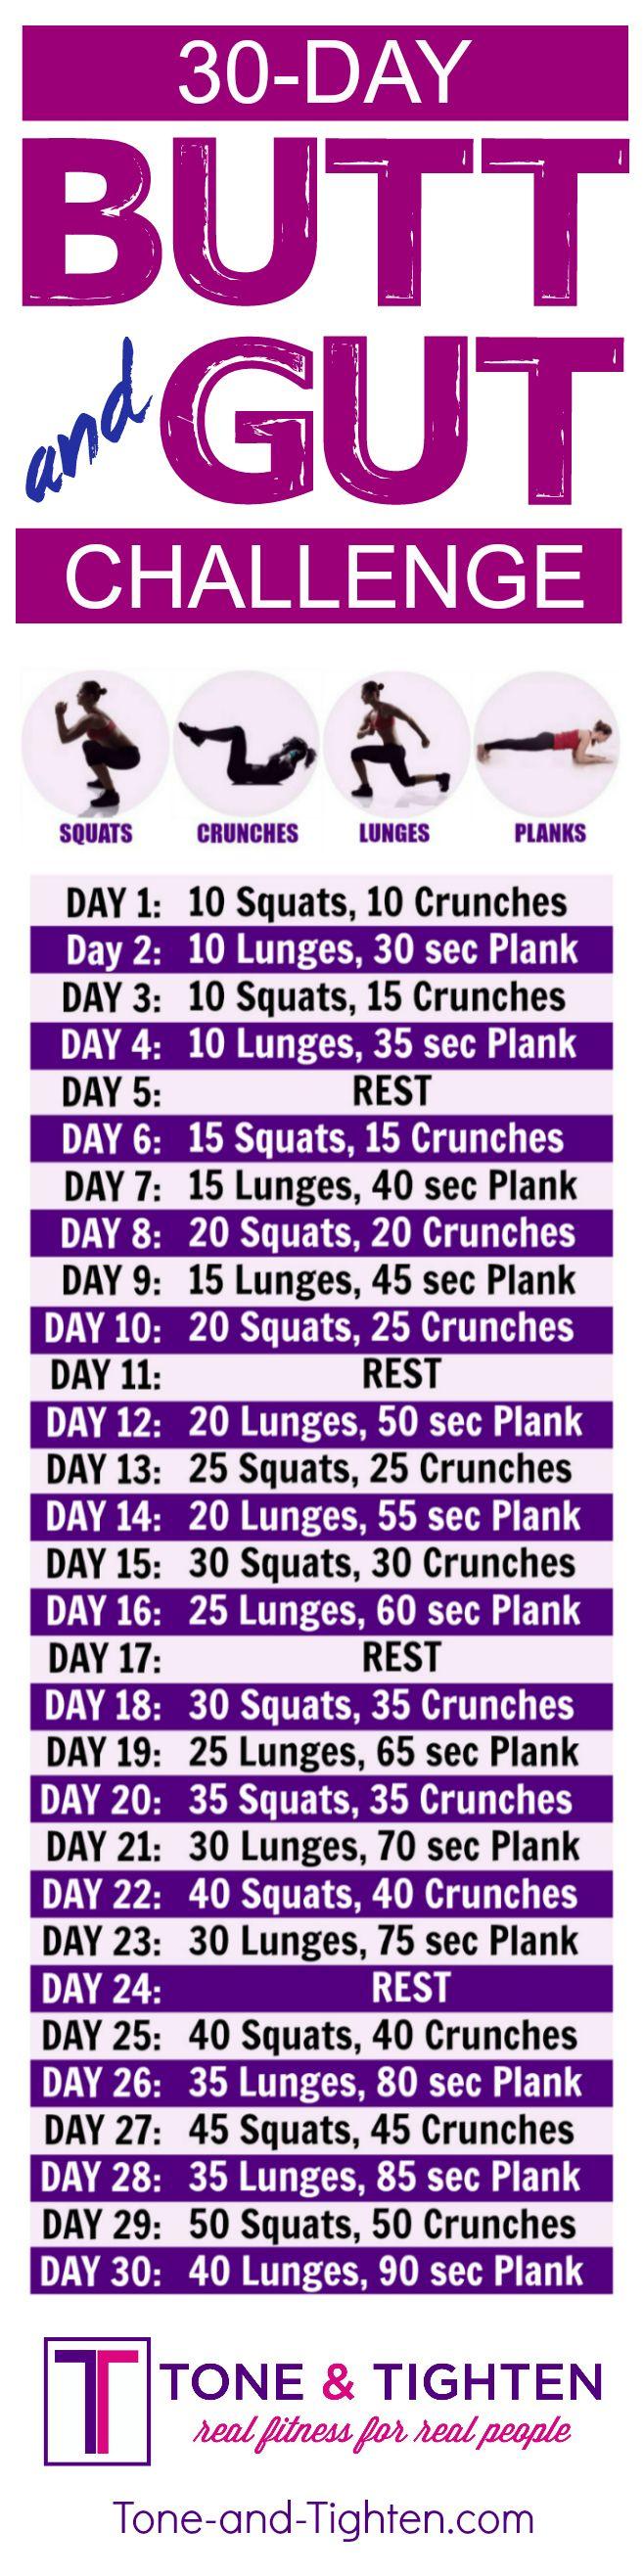 Wedding - 30 Day Workout Plan For Your Butt And Abs